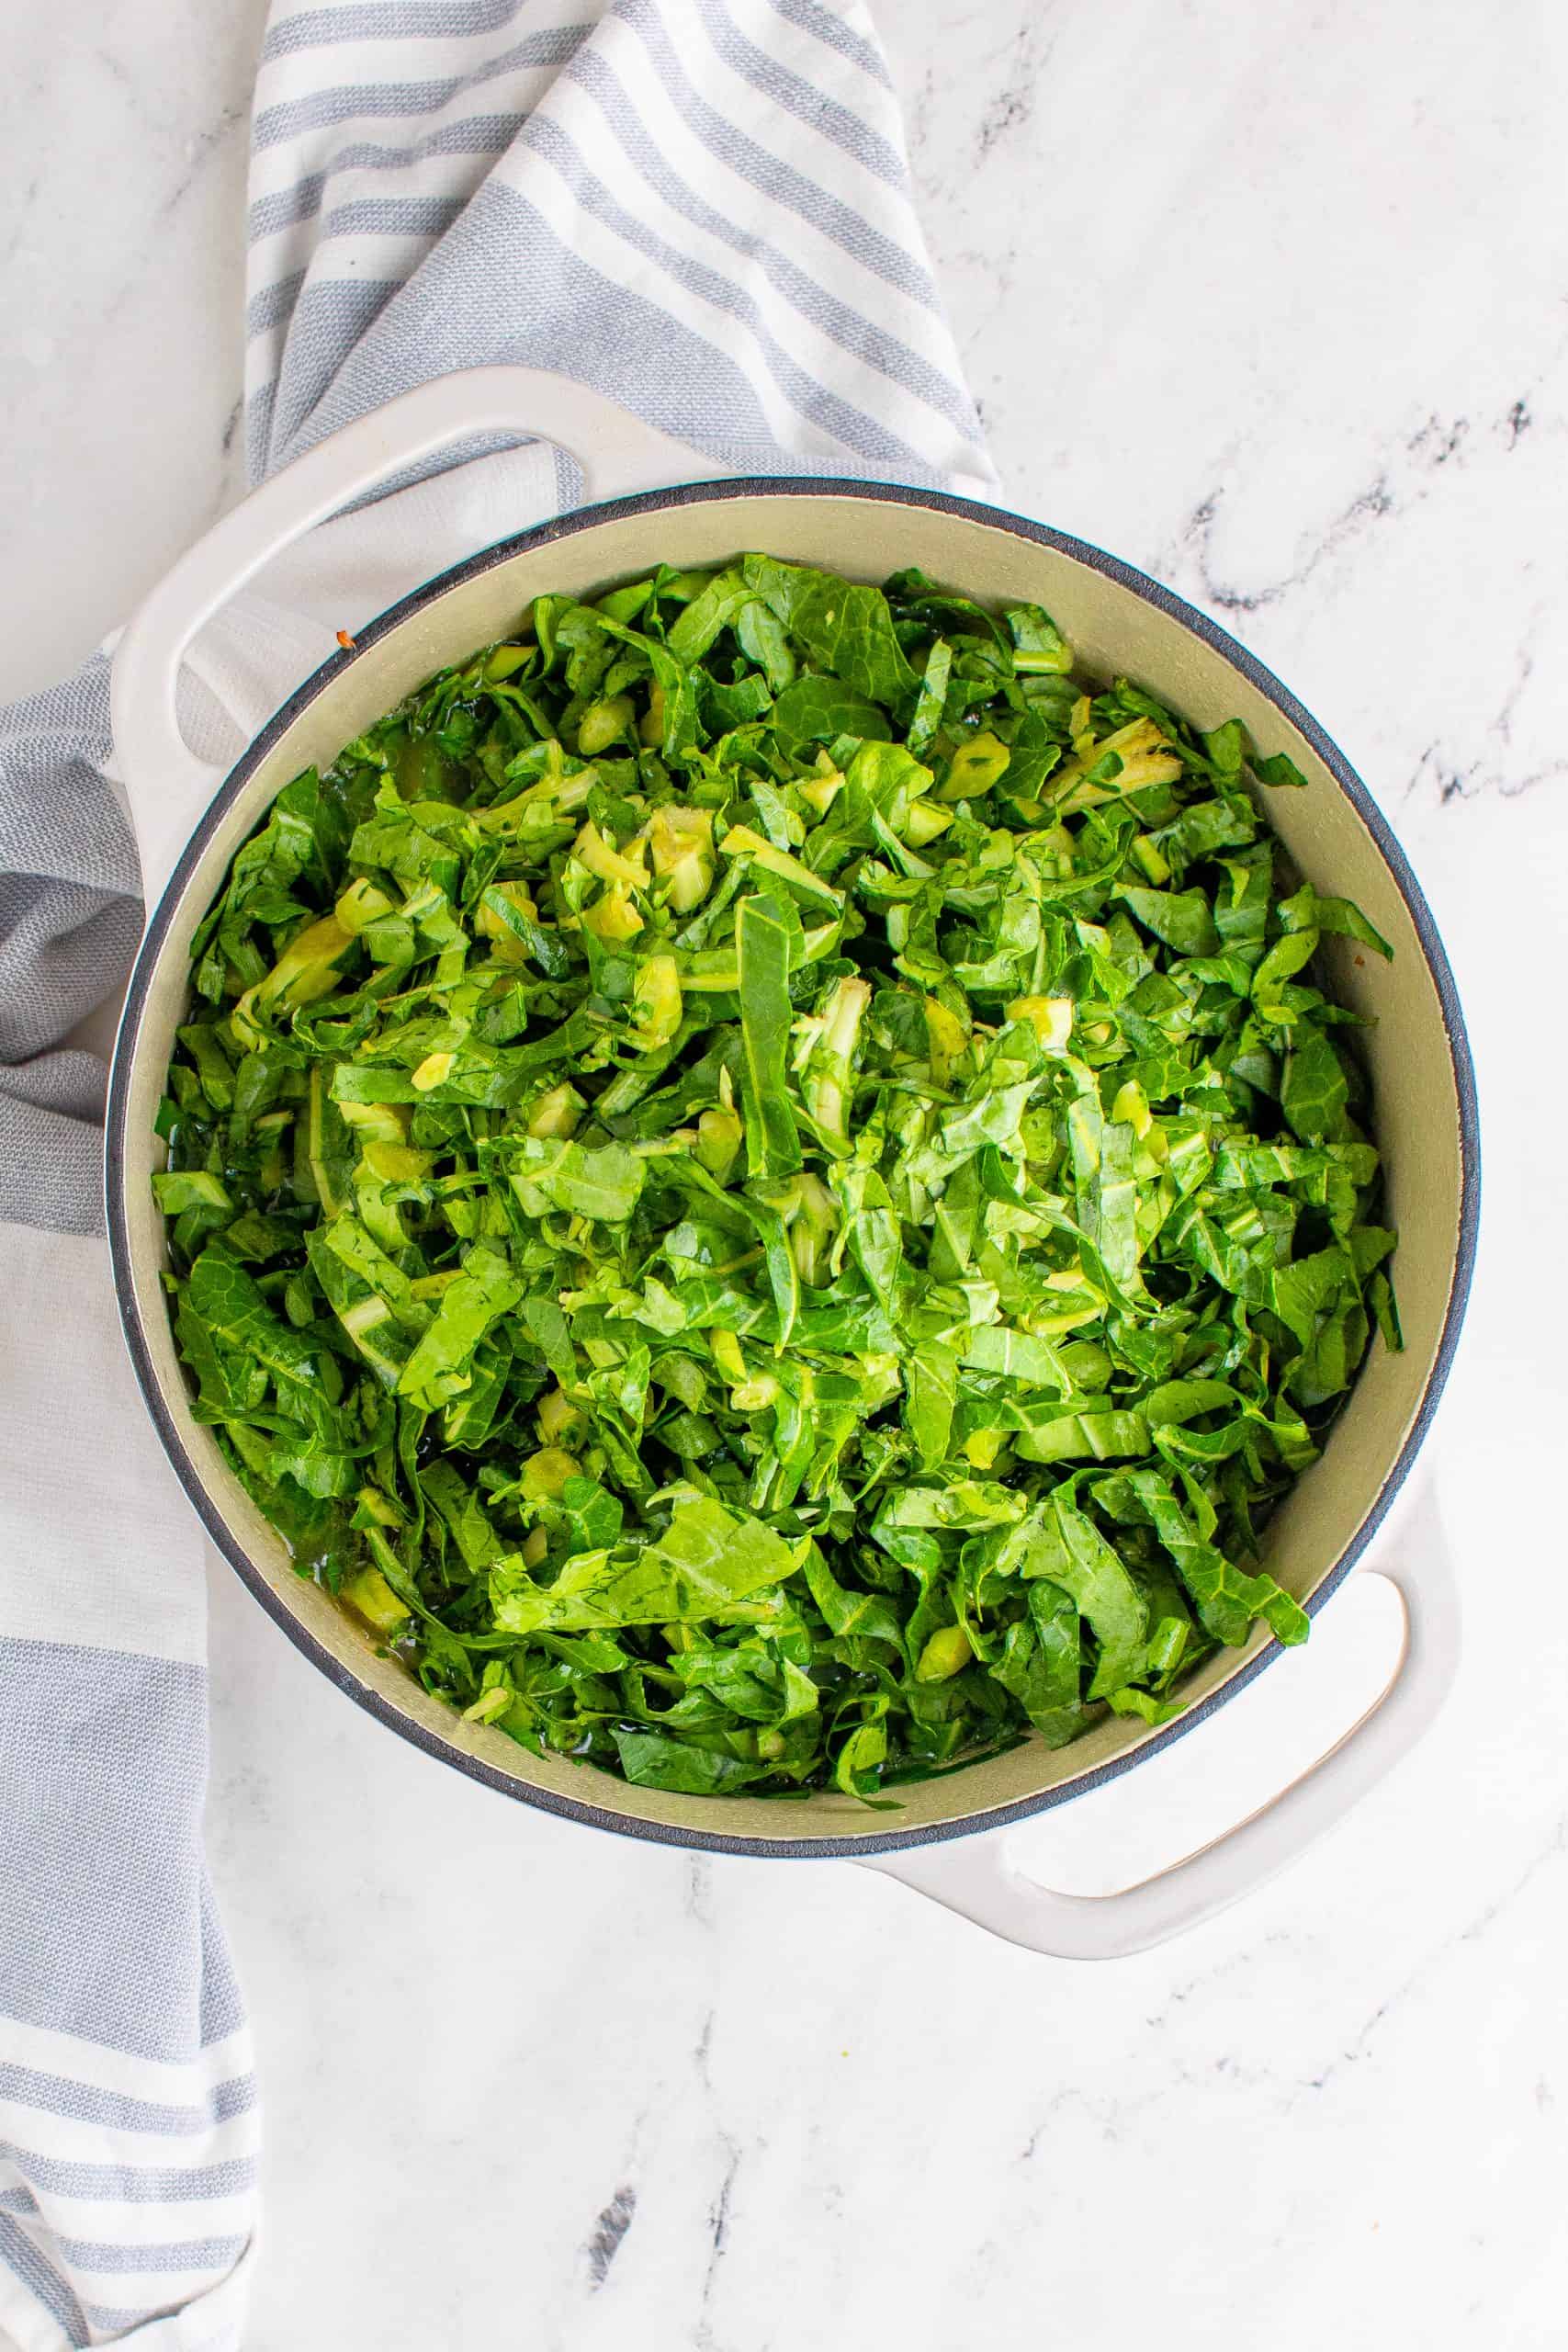 shredded collared greens in a white dutch oven pot shown on a marble surface 